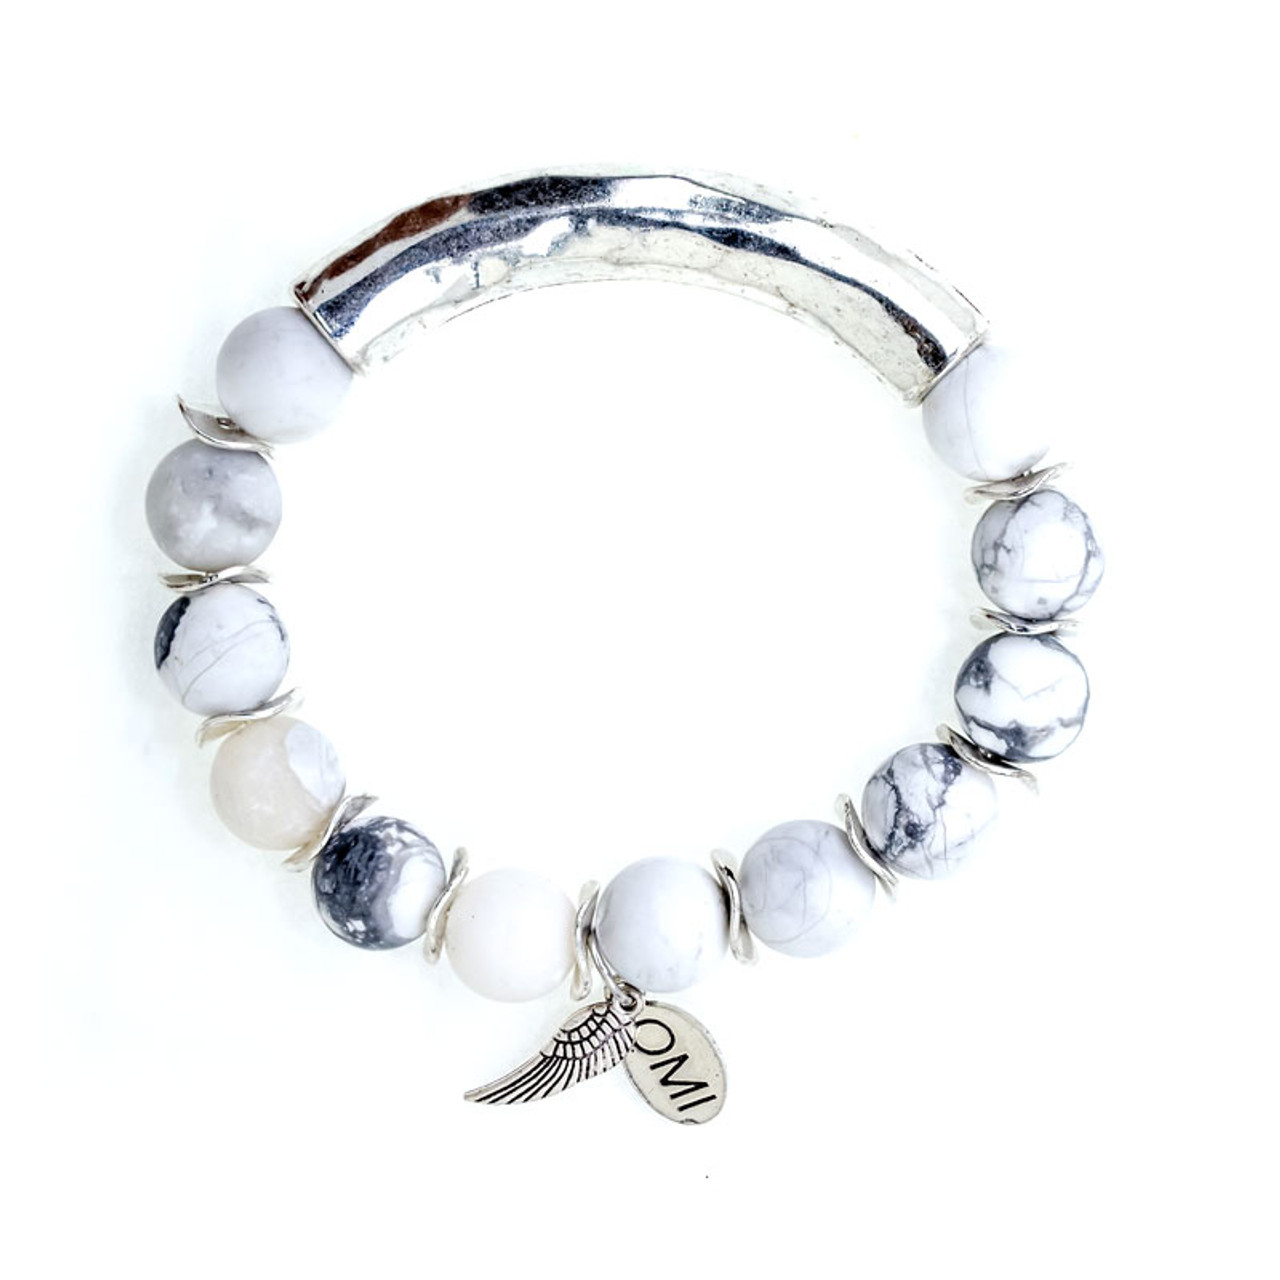 White Marble Howlite Stone Bead Bracelet with Silver Spacers - 10mm